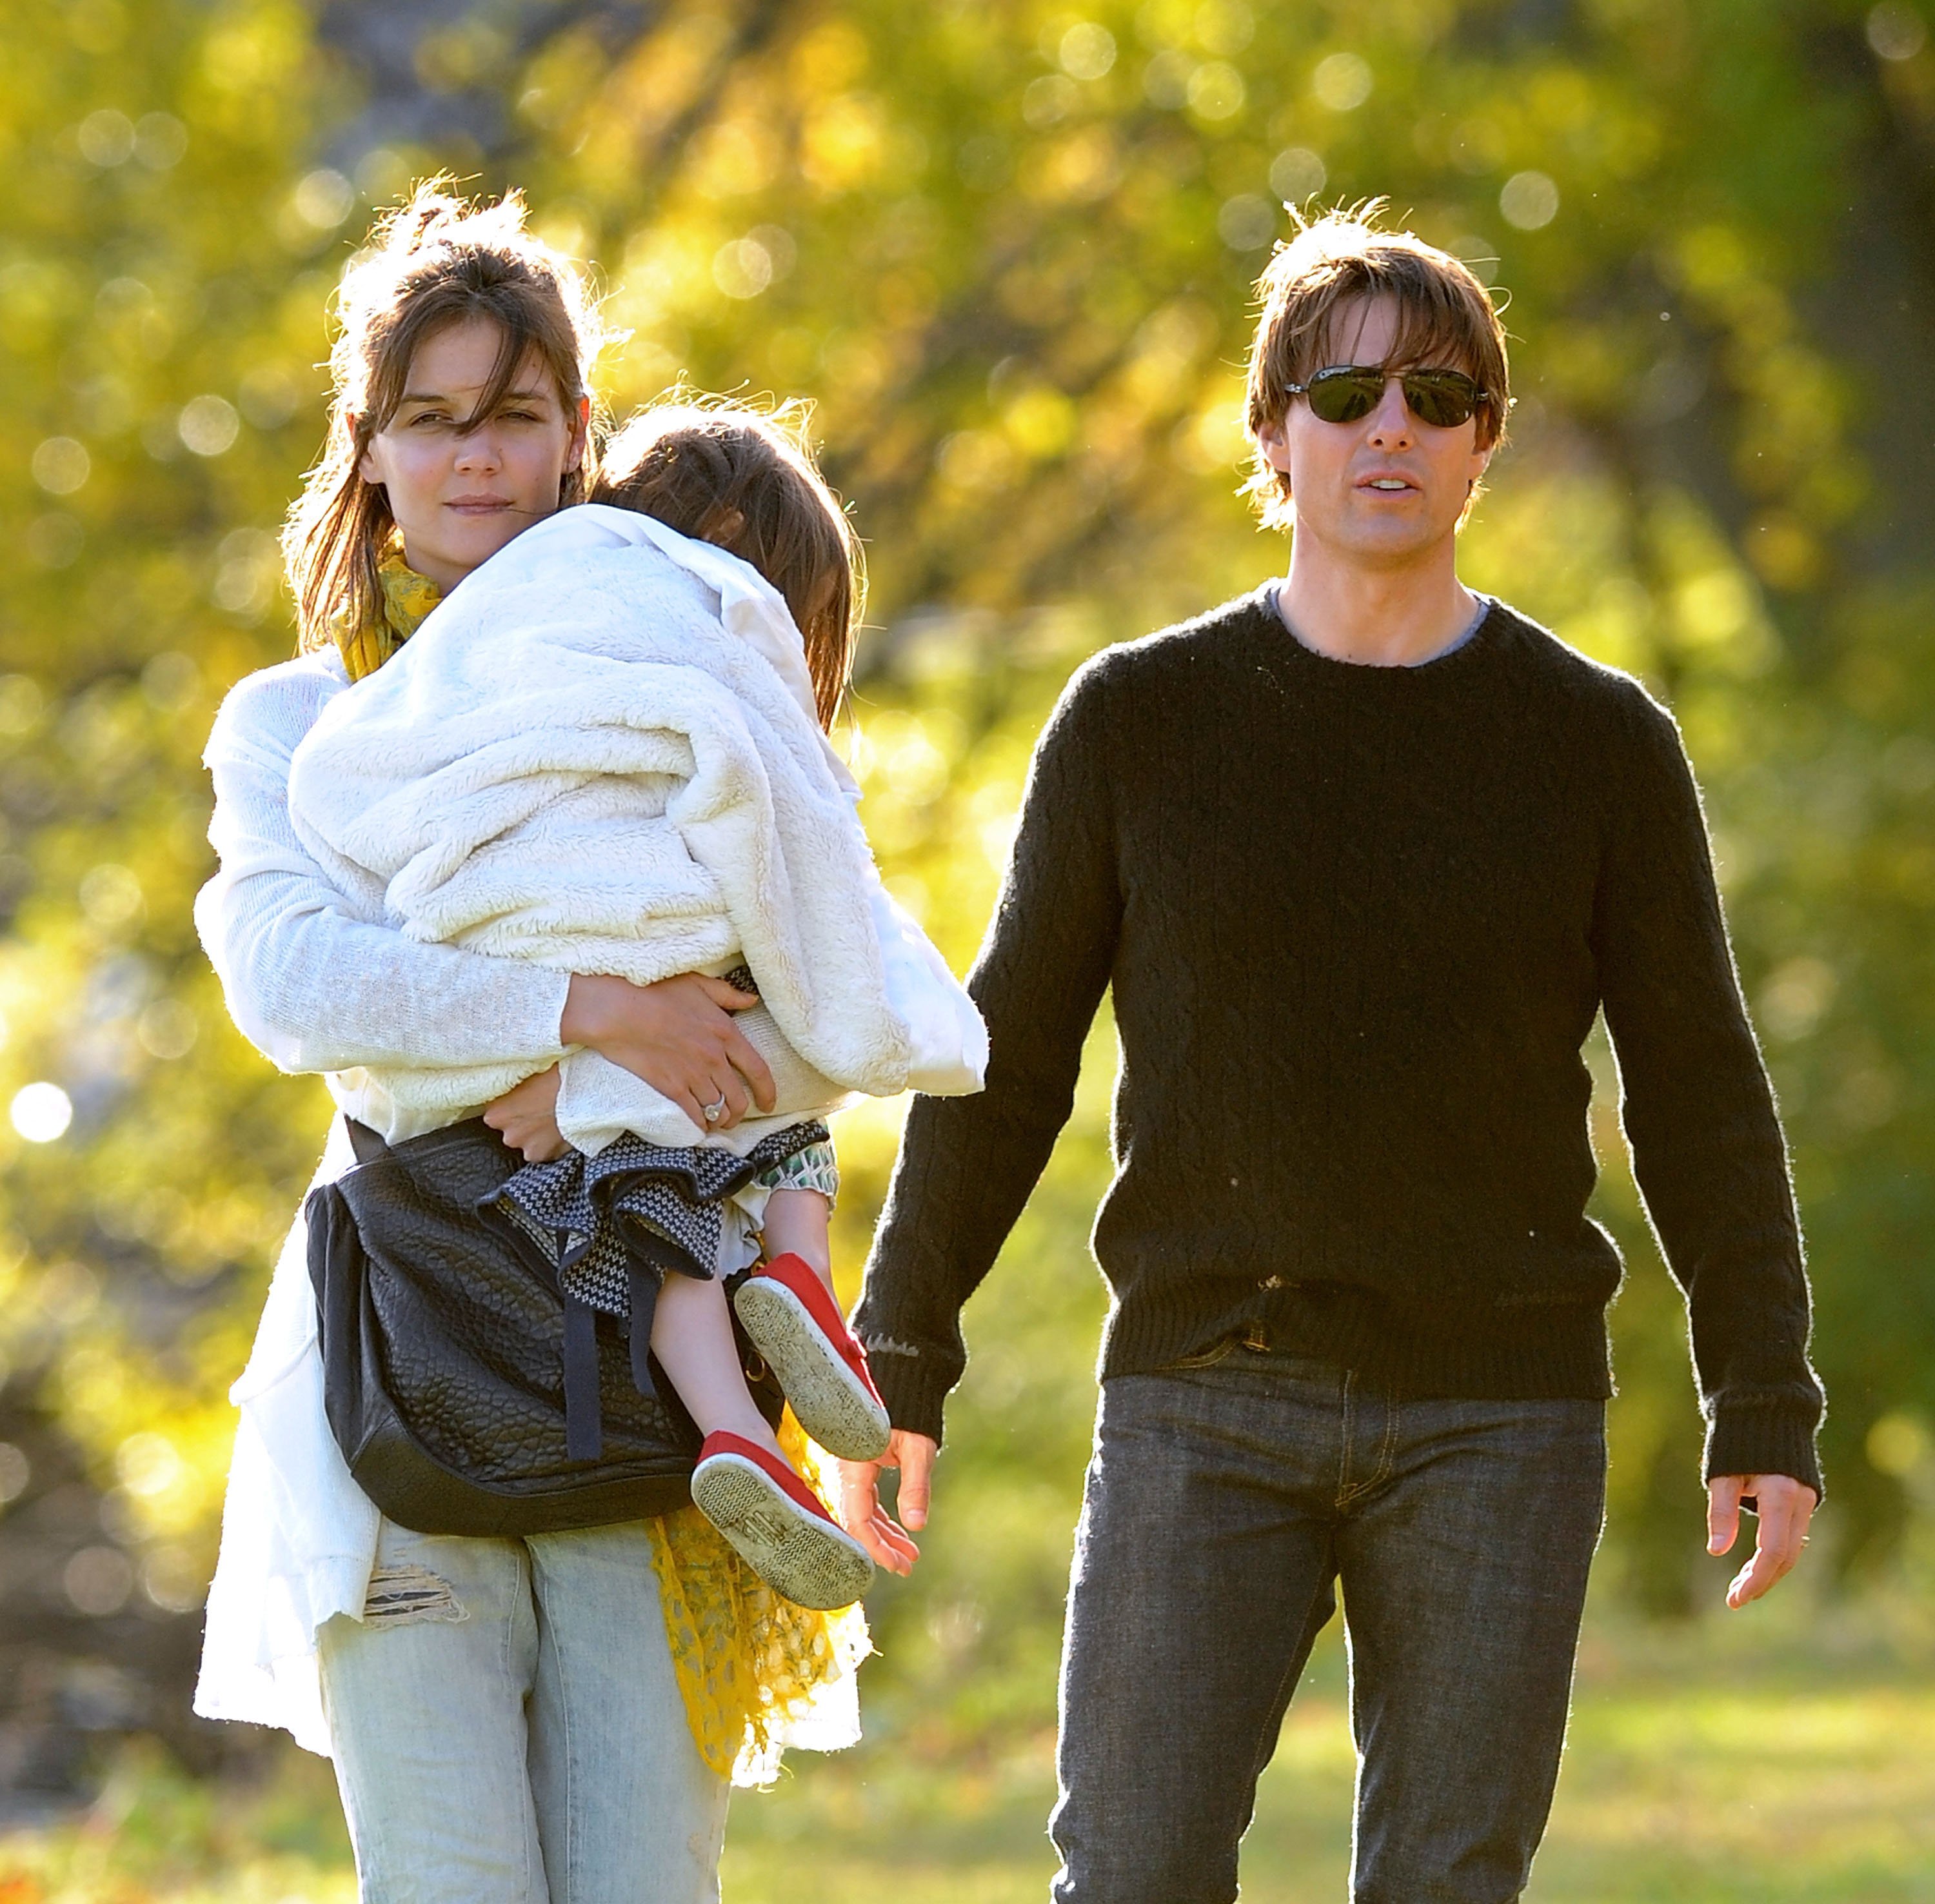 Katie Holmes, Tom Cruise, and their daughter Suri at Charles River Basin in Cambridge, Massachusetts in 2009. | Source: Getty Images